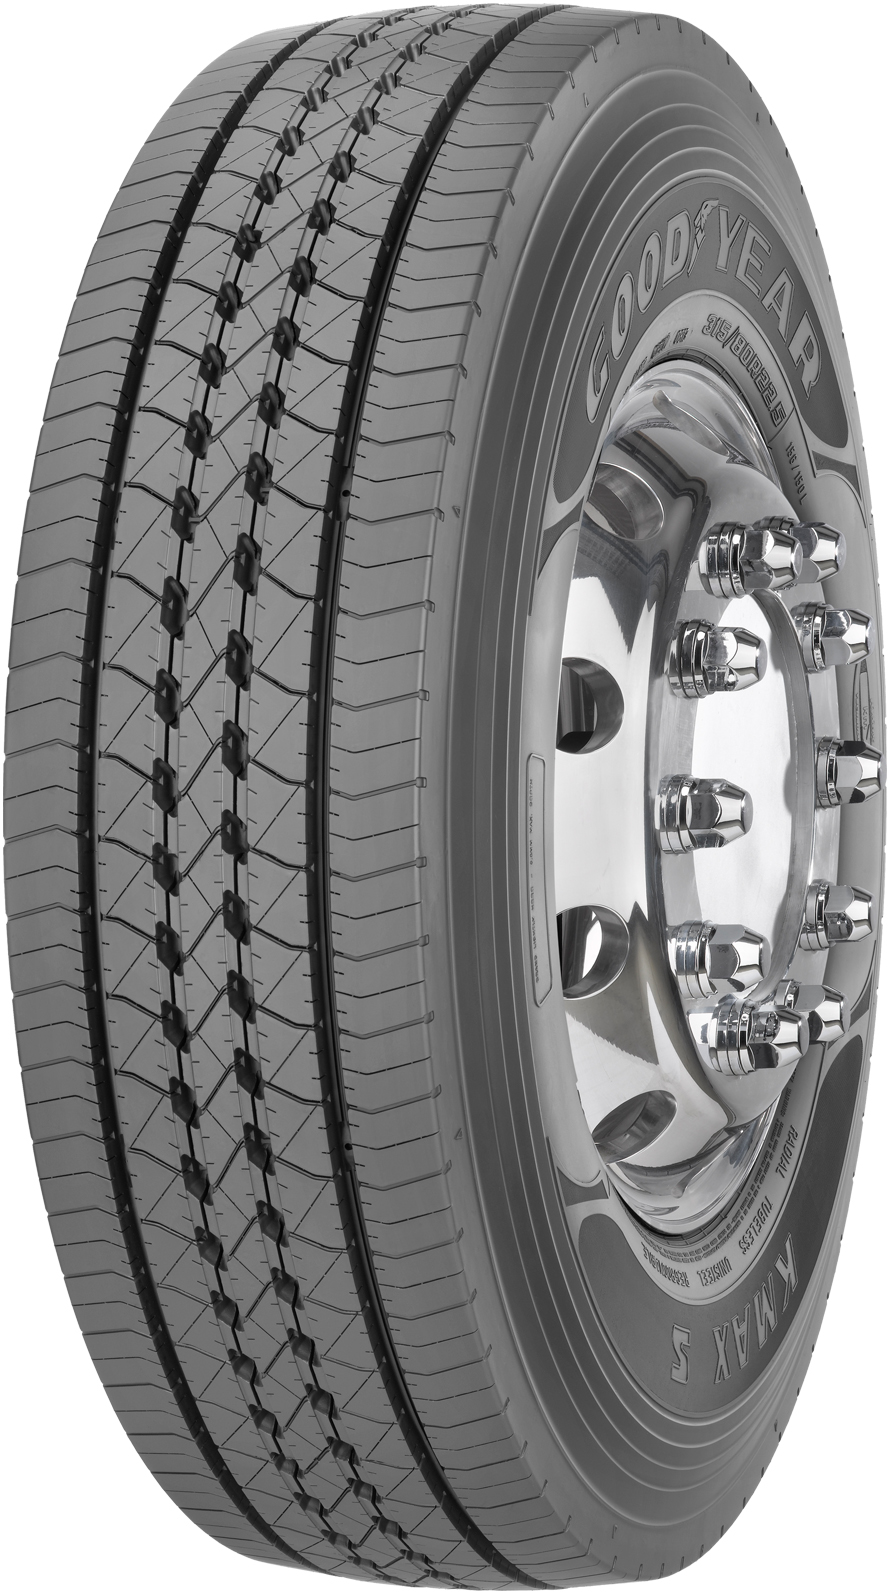 product_type-heavy_tires GOODYEAR KMAX S 12 TL 205/75 R17.5 124M